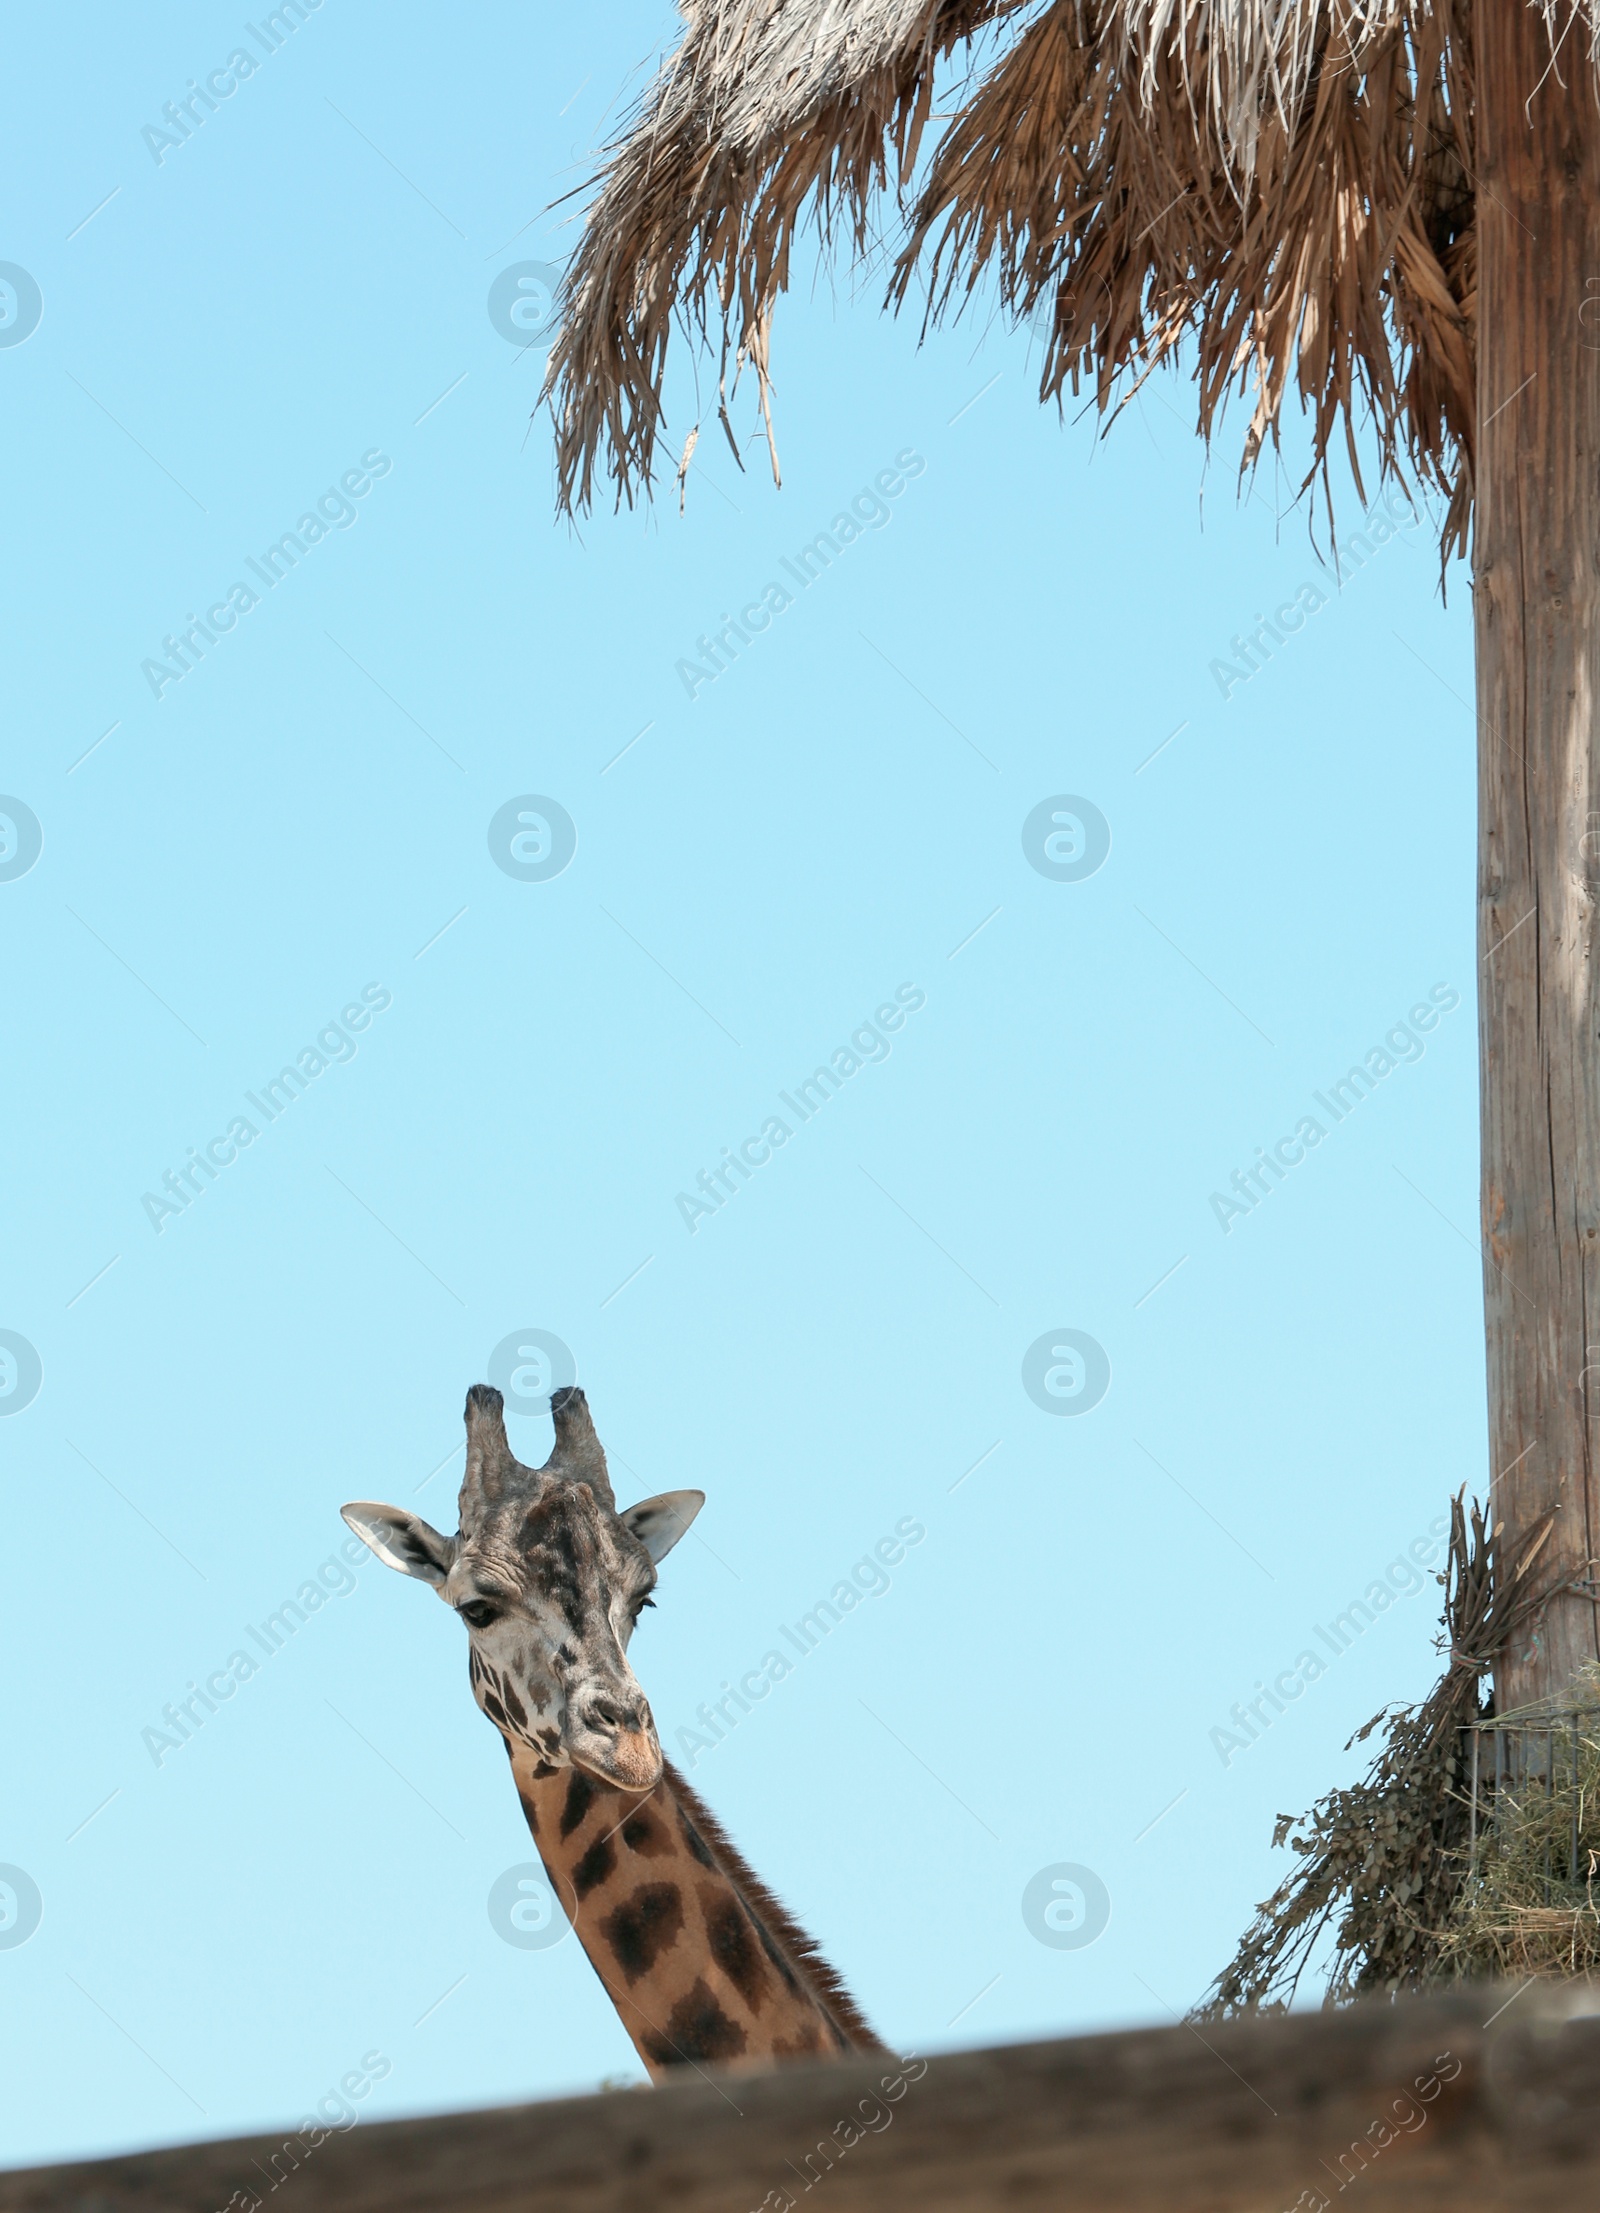 Photo of Rothschild giraffe at enclosure in zoo on sunny day